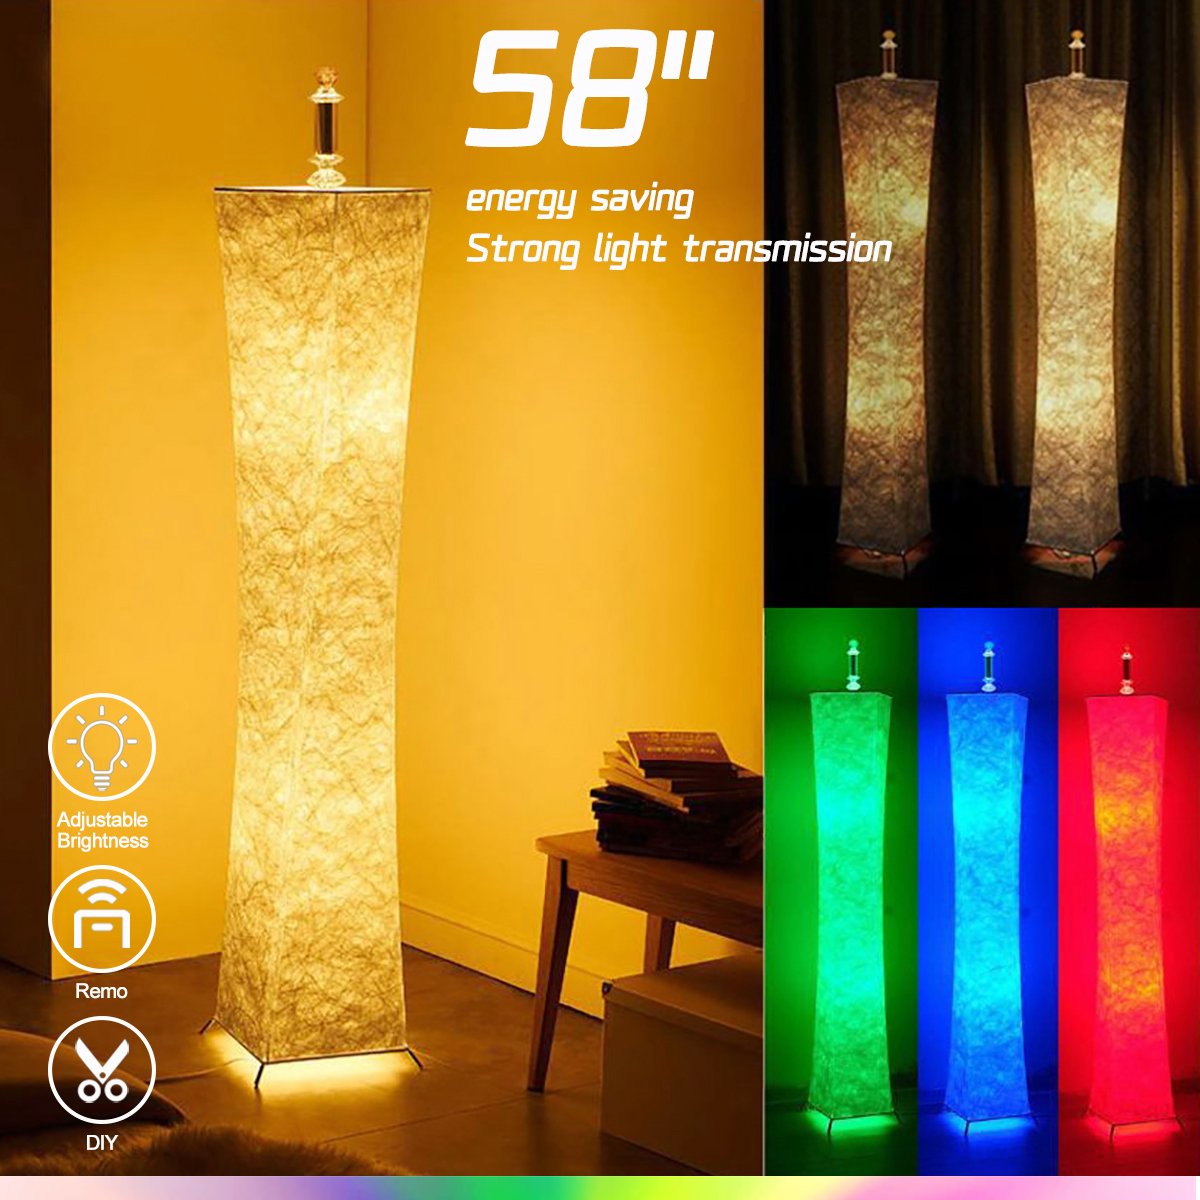 12V-LED-Floor-Lamp-Remote-Control-RGB-Color-Changing-58quot-Height-Bulbs-for-Livingroomish-1806500-2